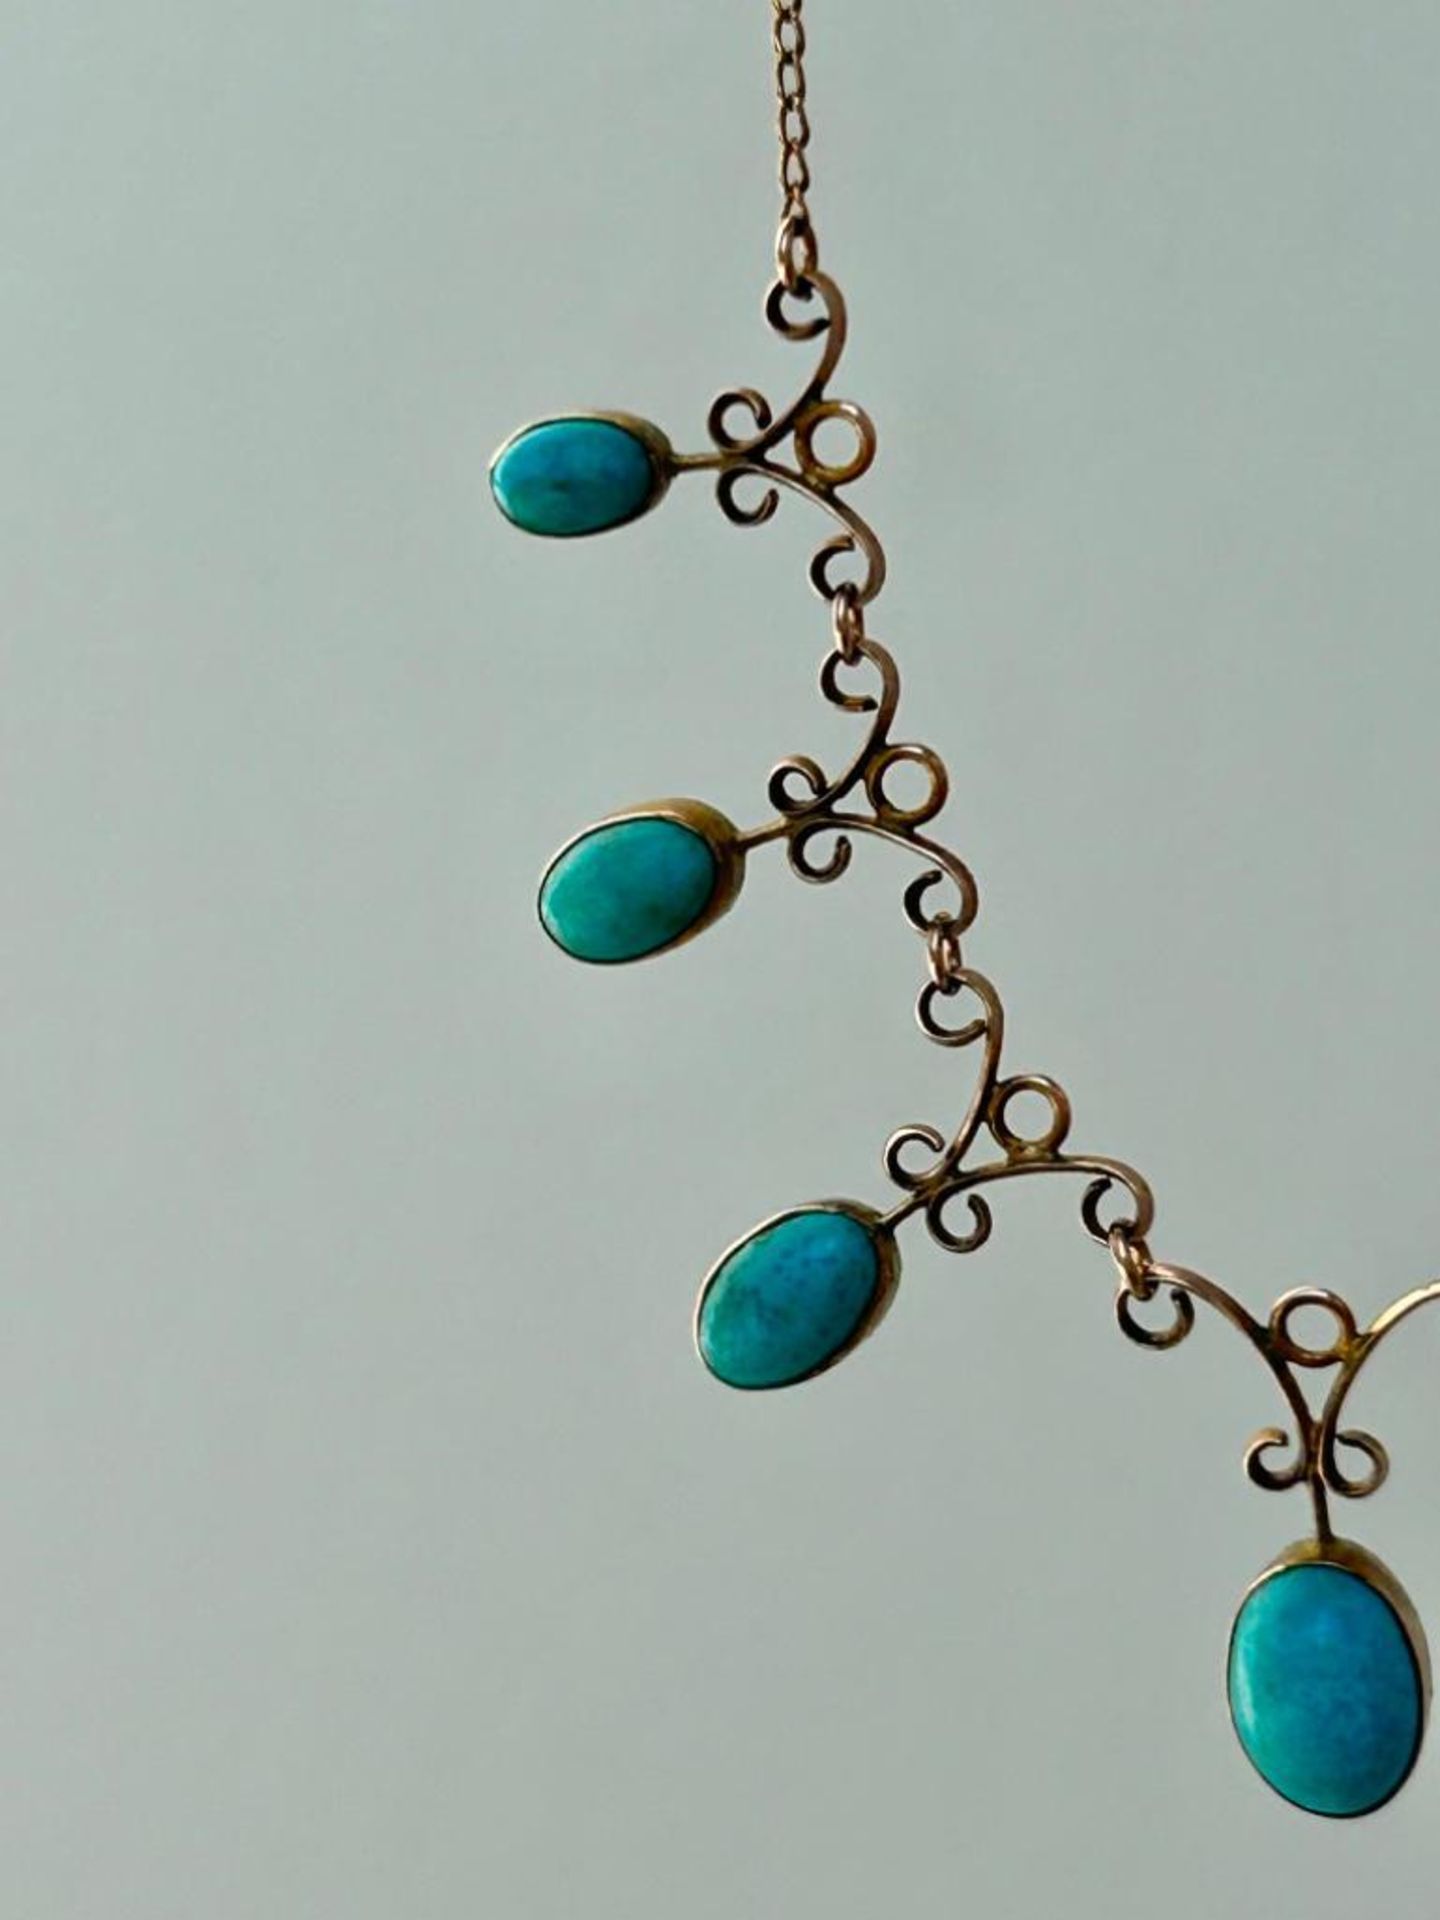 Antique Turquoise Fringe Necklace in Gold with Barrel Clasp - Image 3 of 6